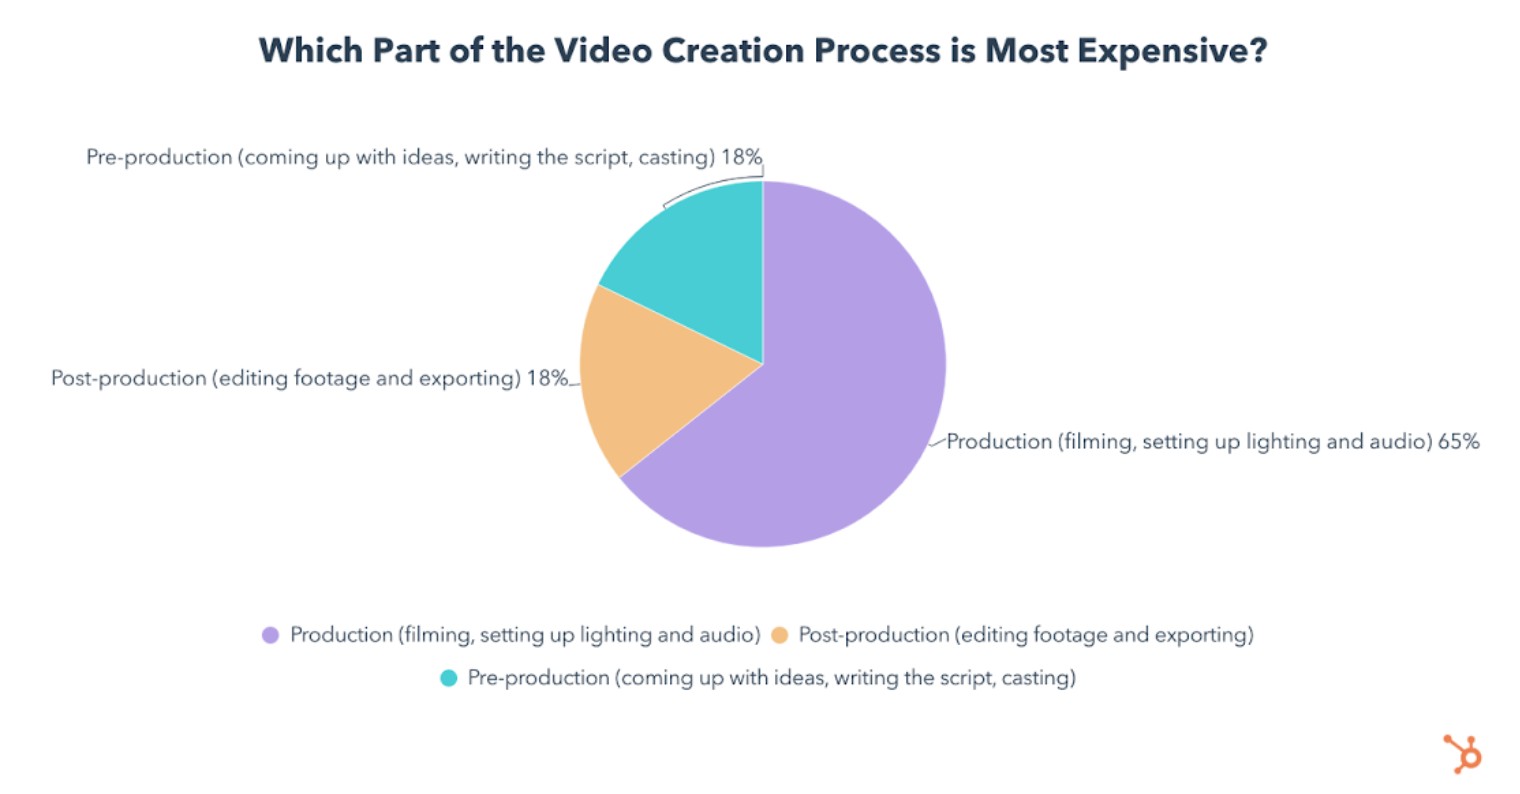 the most expensive part of video creation